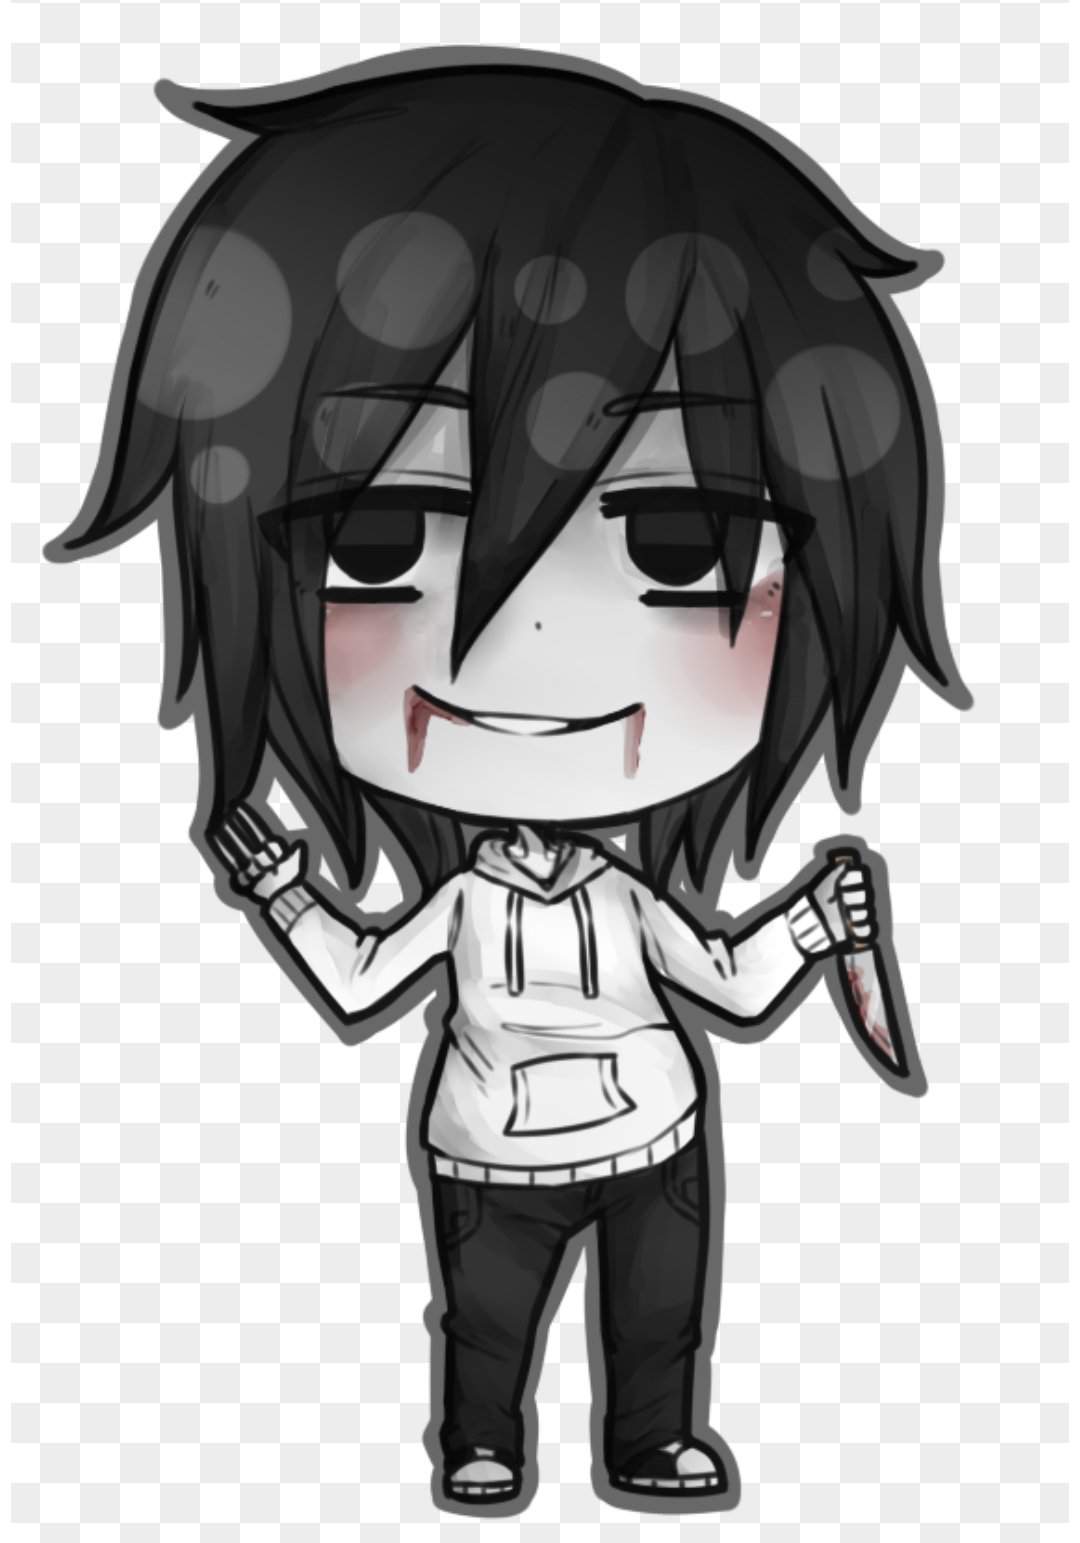 Does jeff the killer look like a uncooked pancake?! 